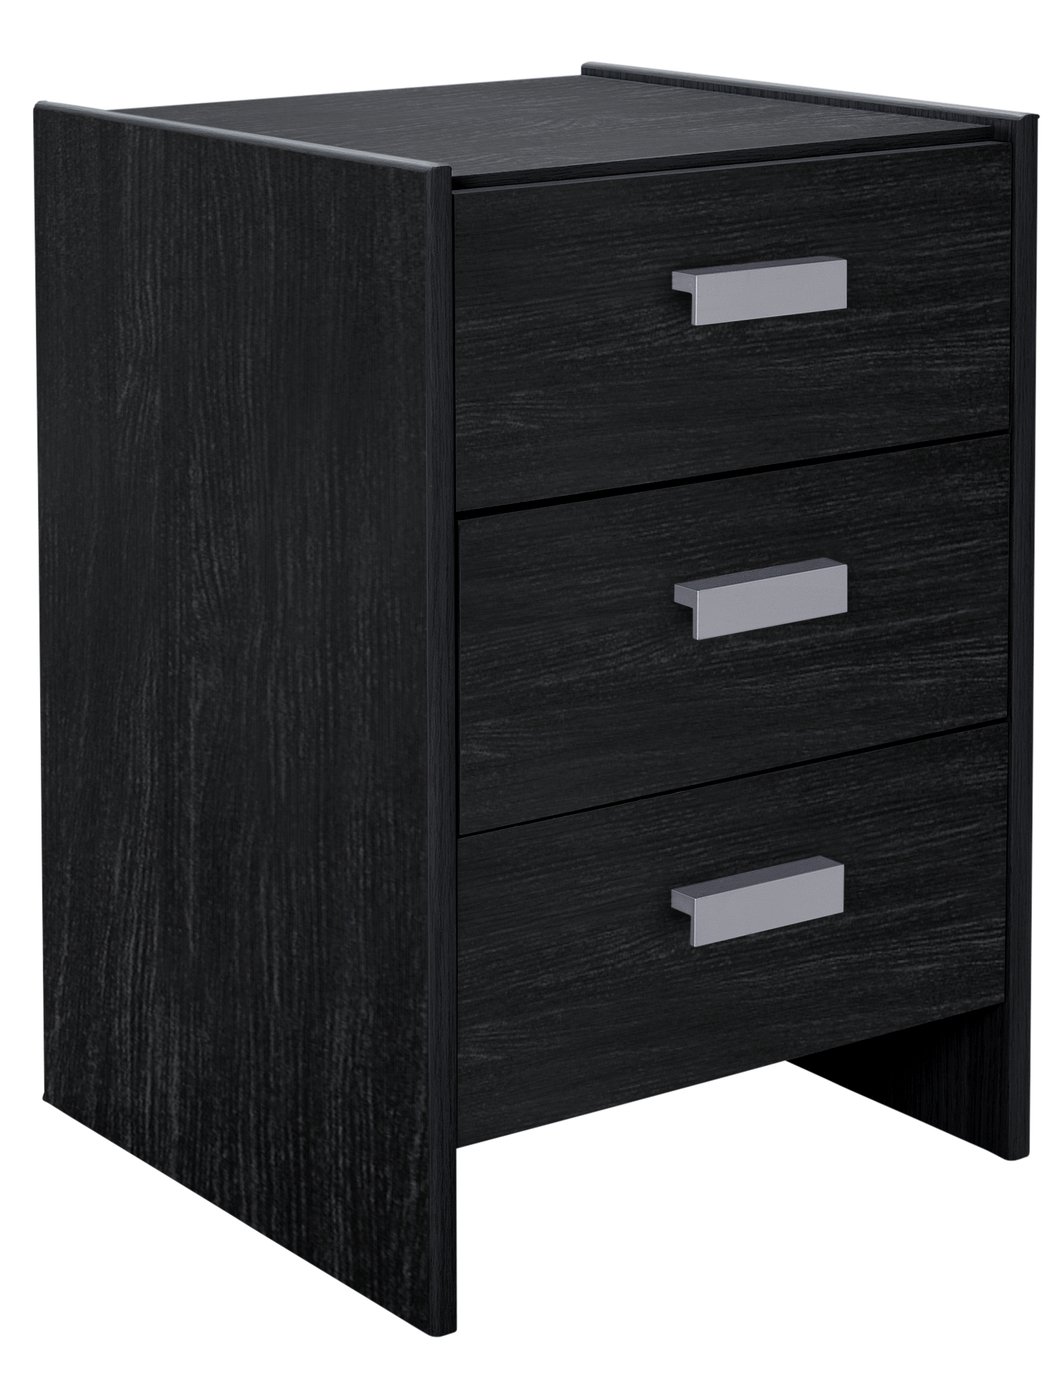 Argos Home Capella 3 Drawer Bedside Table - Black